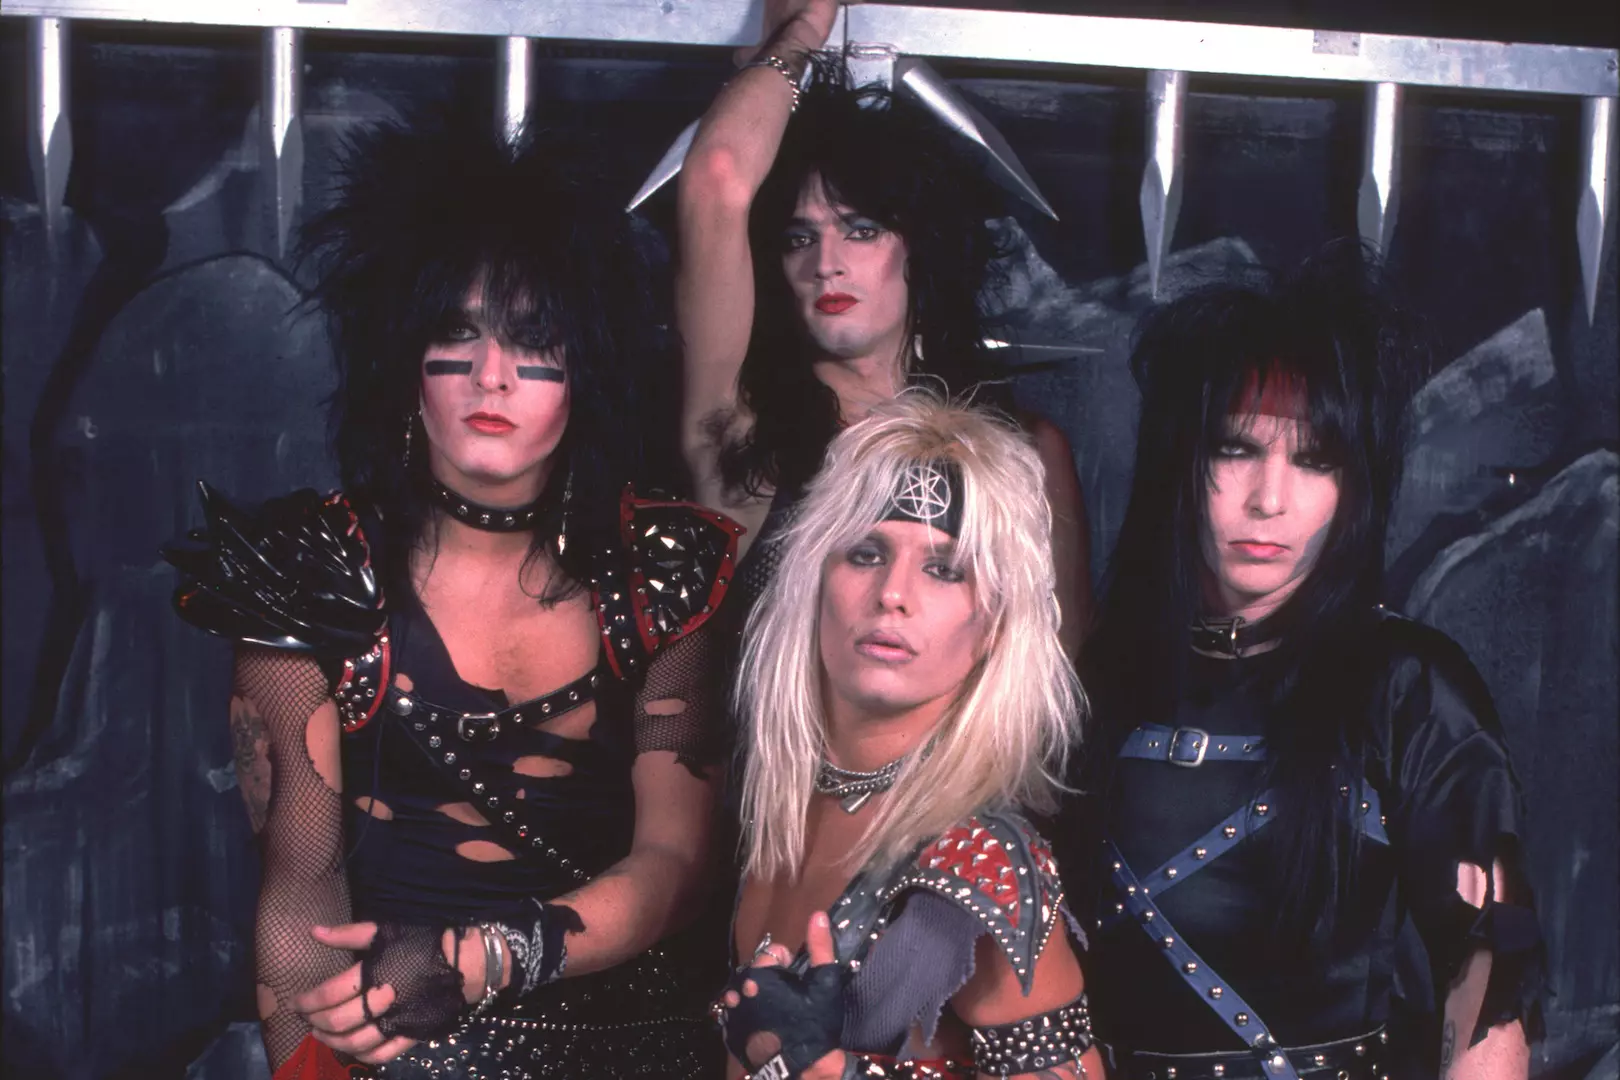 37 Years Ago: Motley Crue Release 'Shout at the Devil'